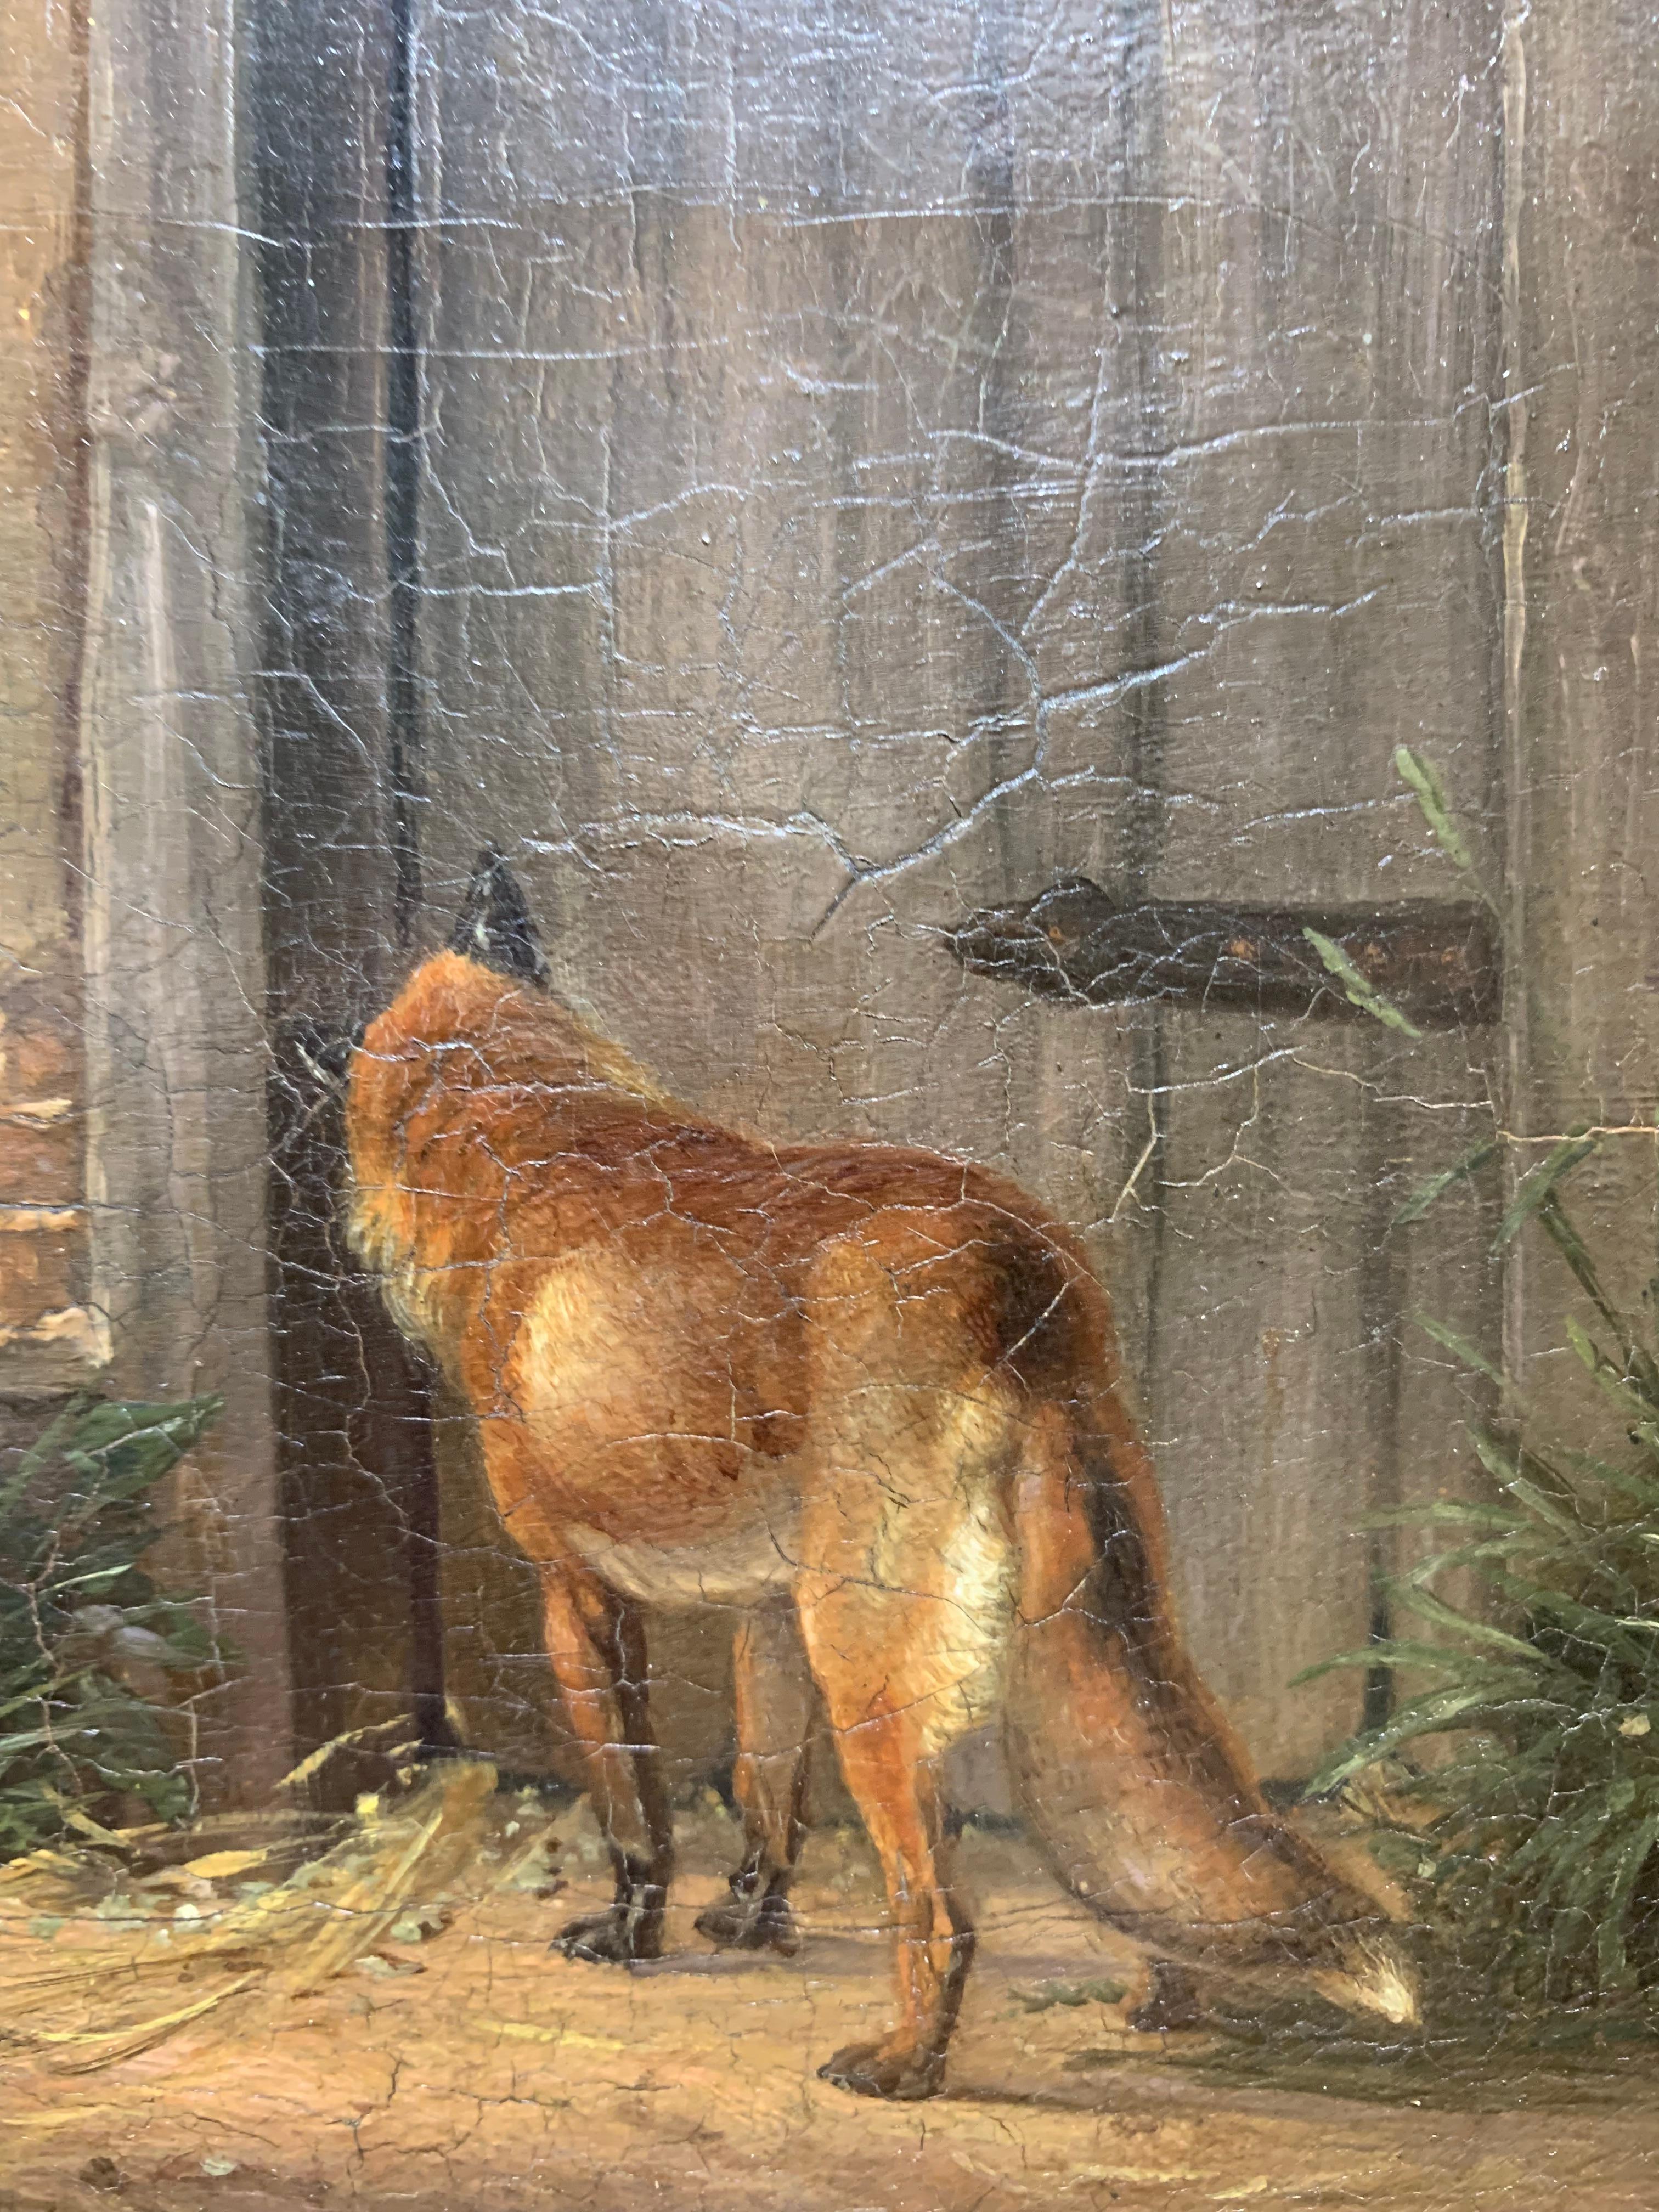 The fox in search of prey.
19thC
Technique: oil on canvas.
Some cracking of paint, typical of 19th-century painting, is present.
Painting depicts animal, focused on searching the chicken coop, stretching its neck and head driven by predator